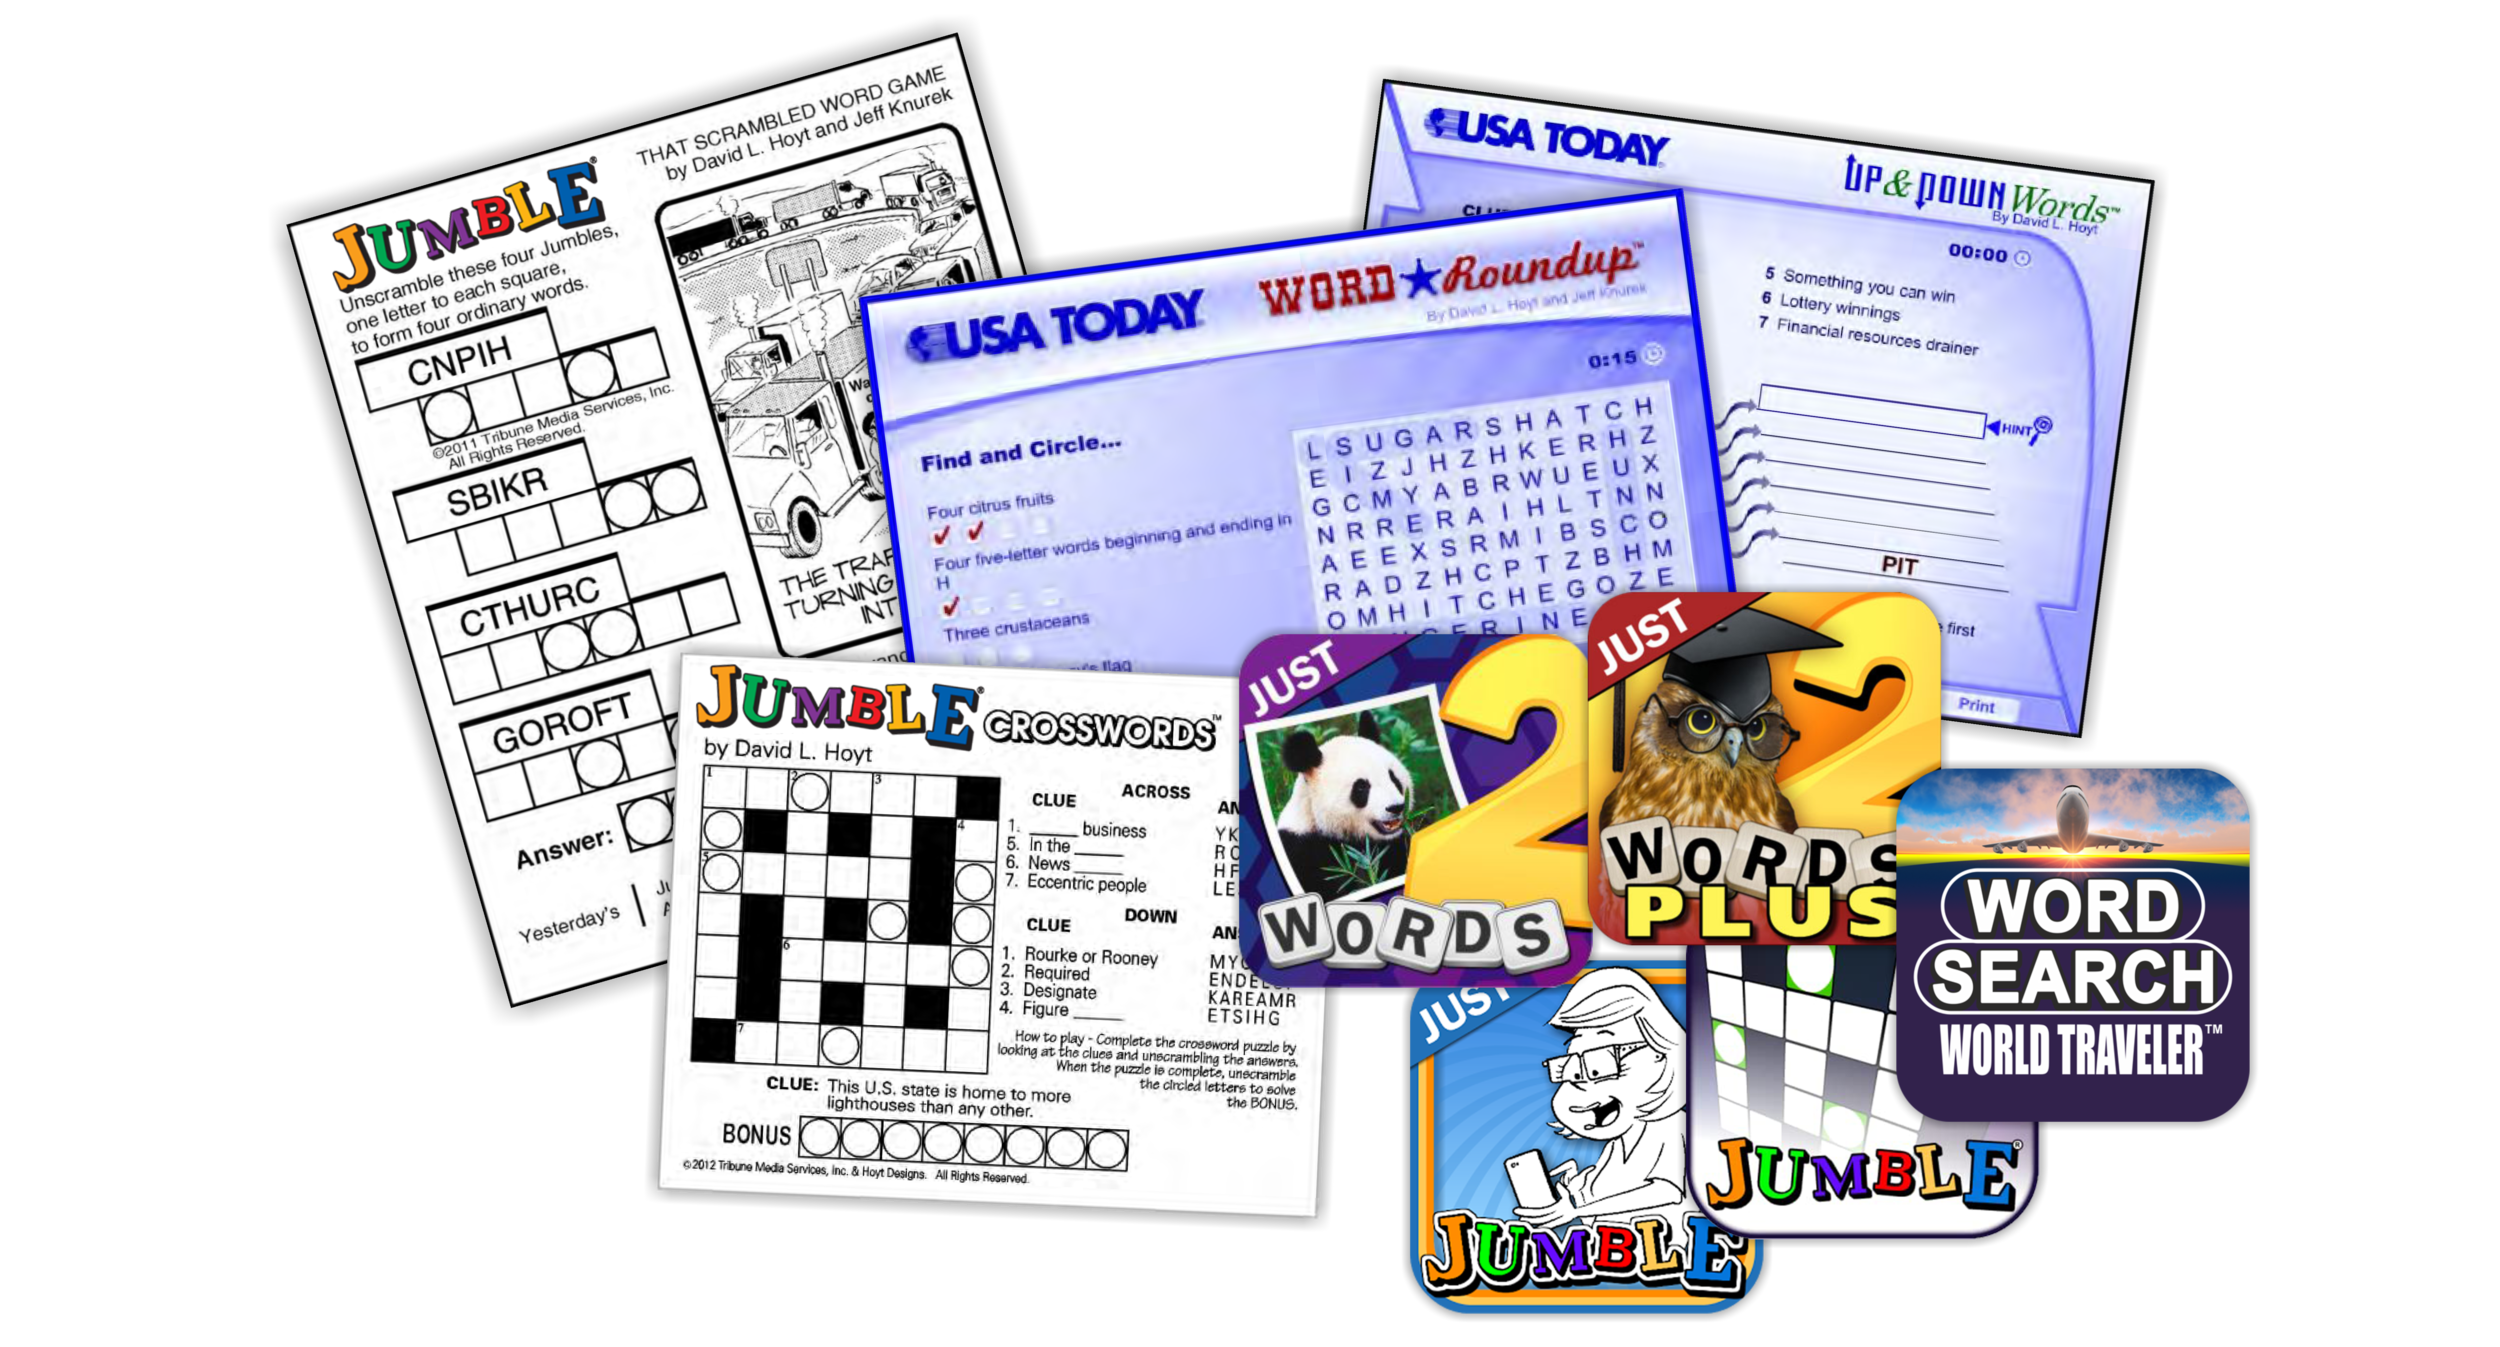 Play PlusWord, the new free daily crossword with an…